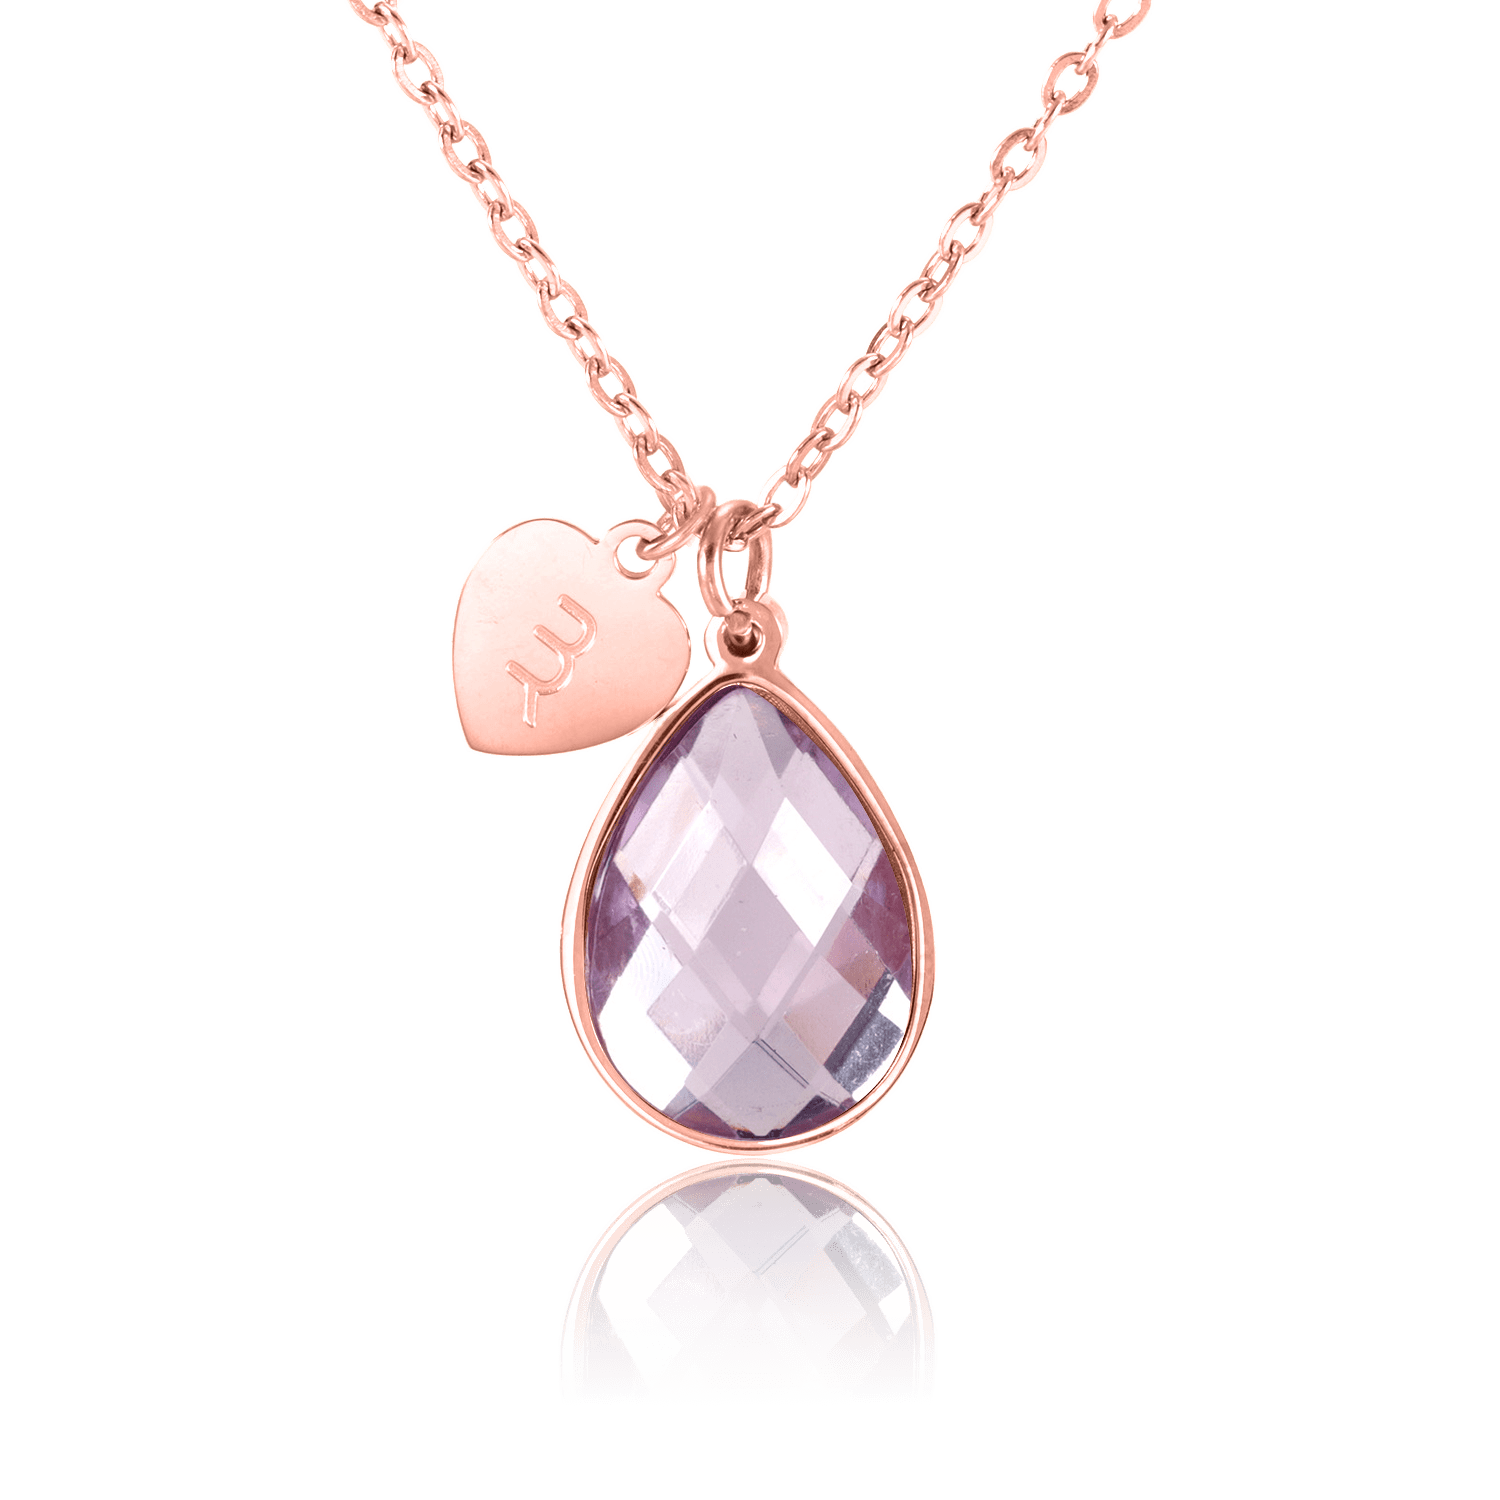 bianco rosso Necklaces Rose Gold August Birthstone - Alexandrite cyprus greece jewelry gift free shipping europe worldwide